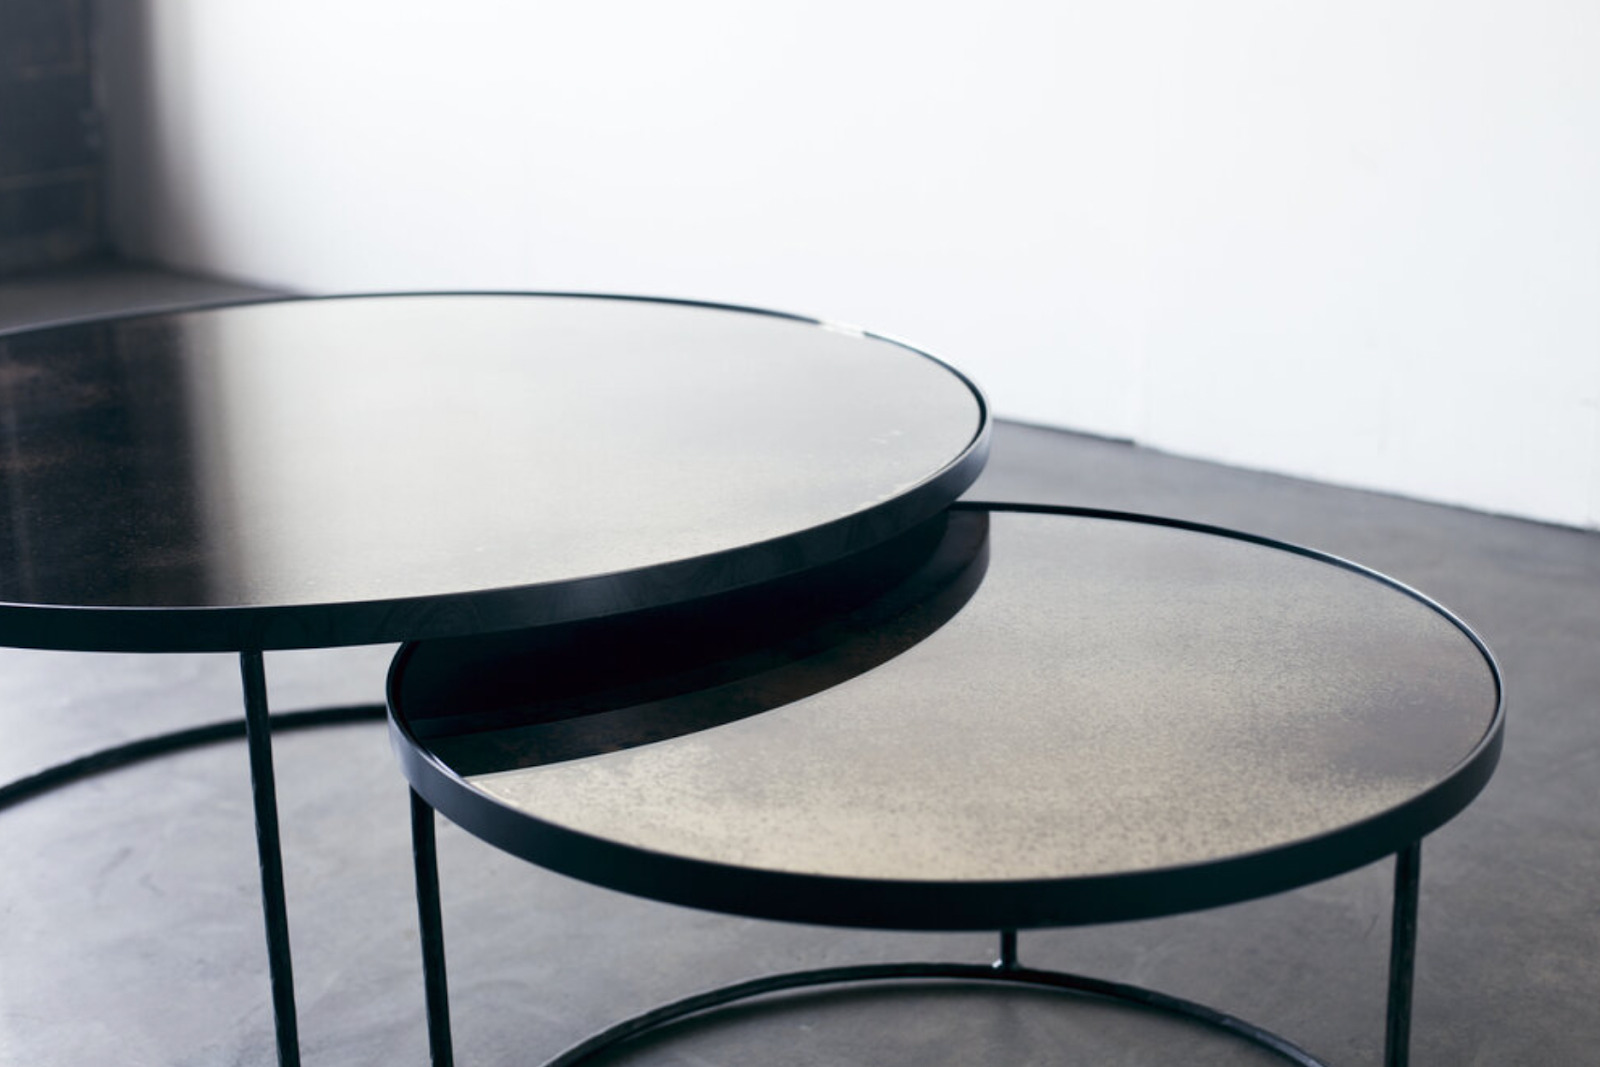 Mirrored Surface Nesting Tables